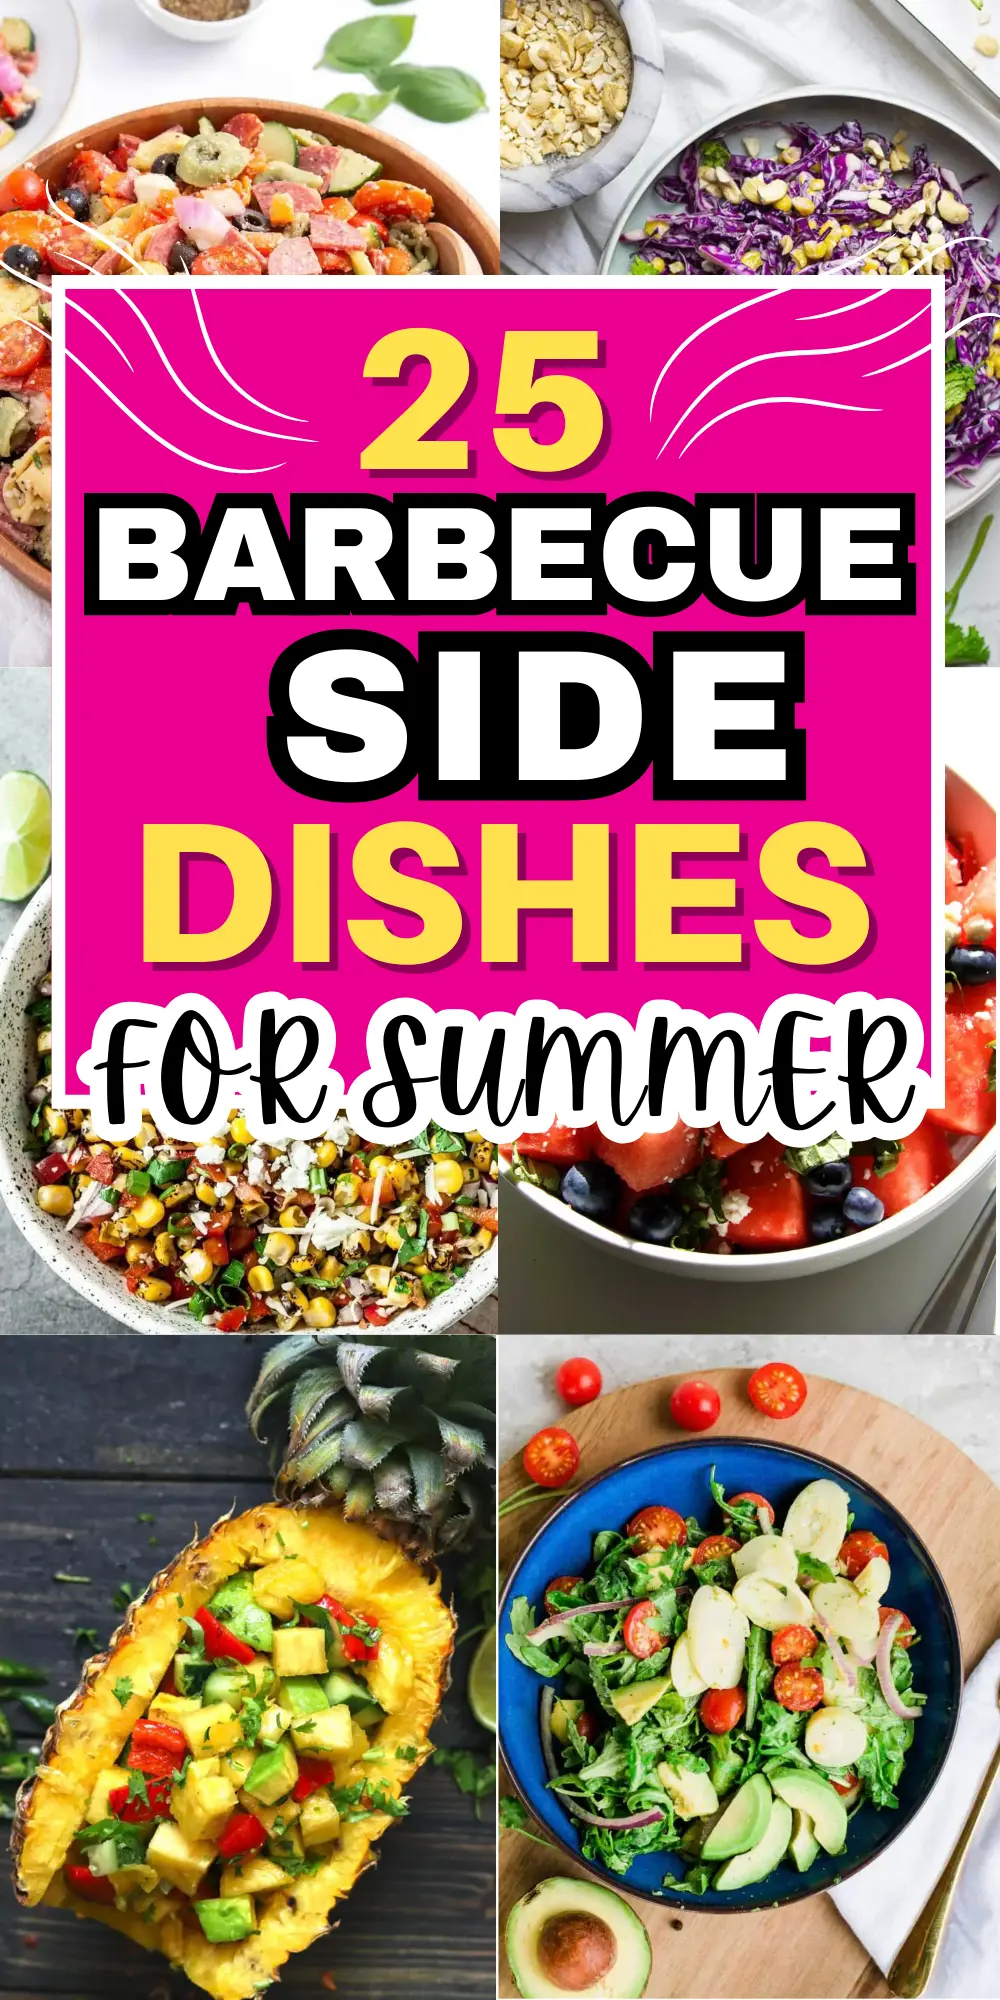 bbq side dishes